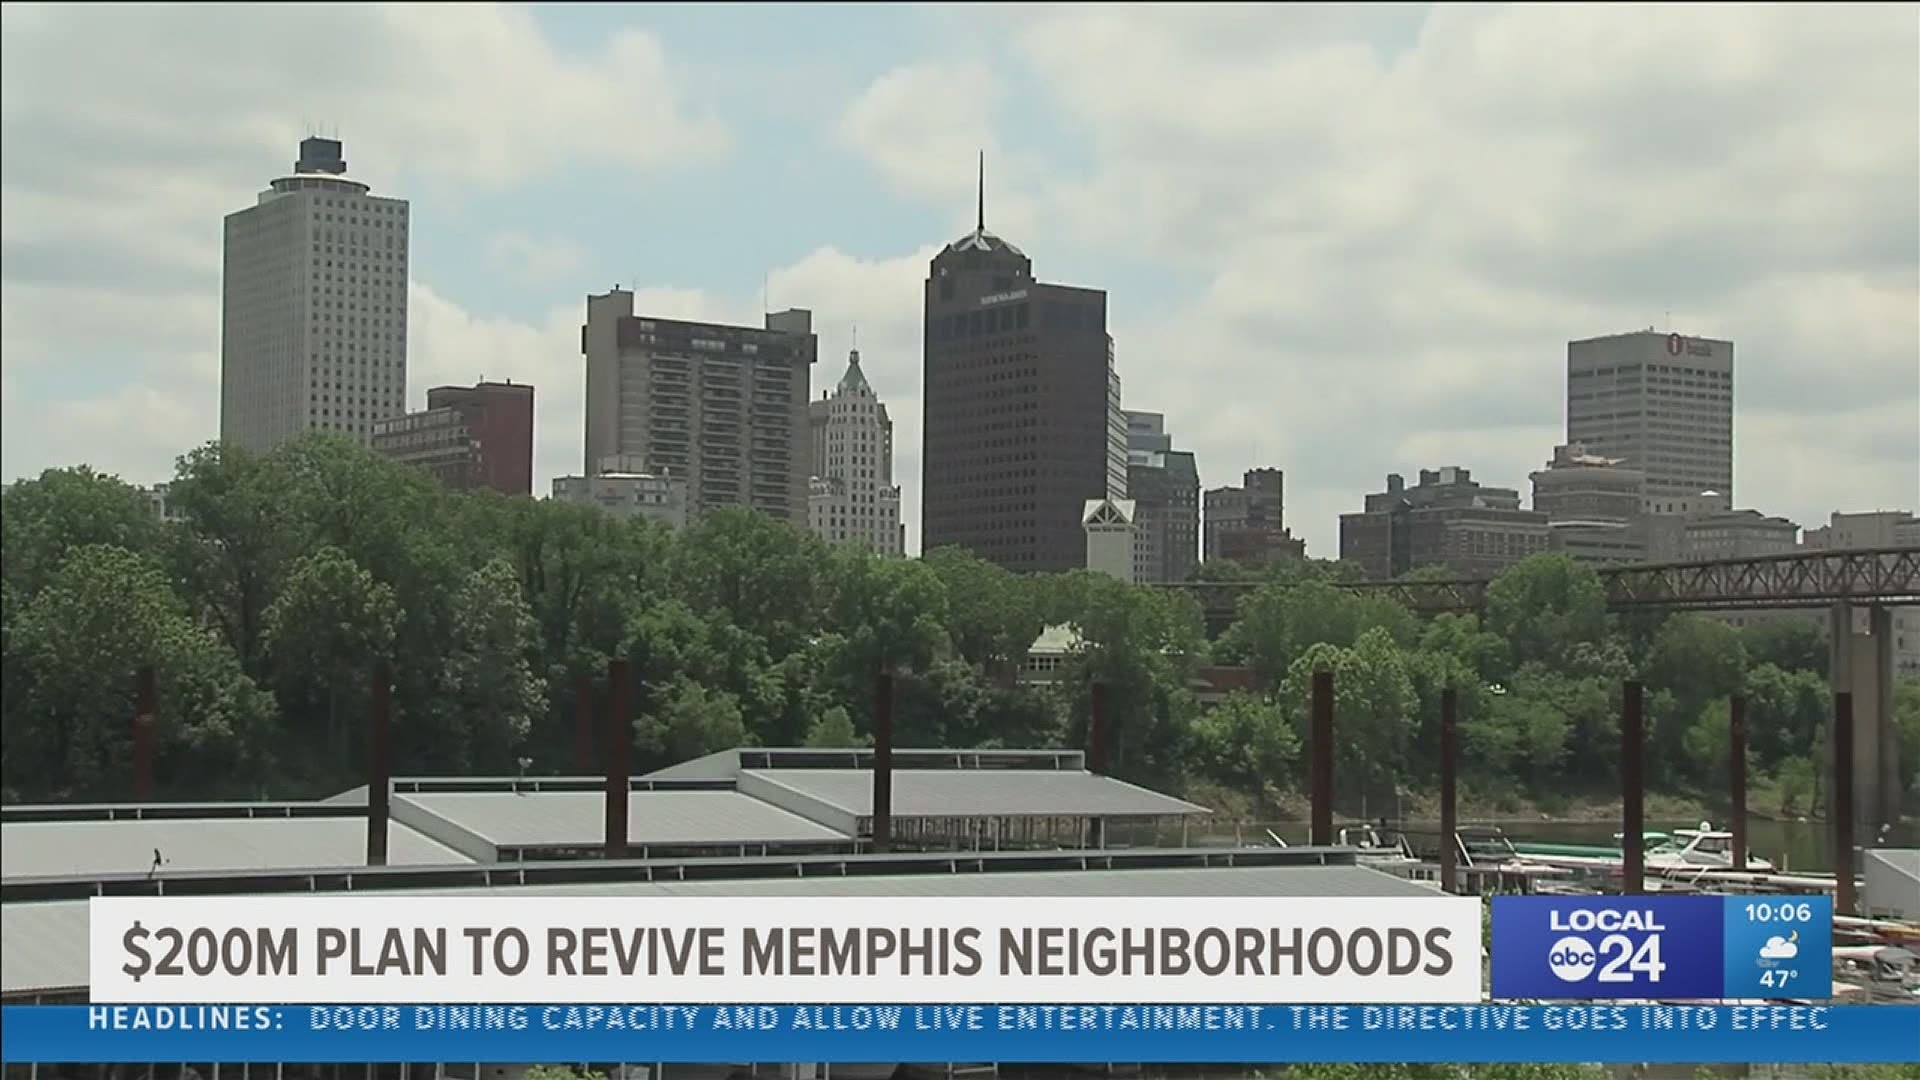 “I believe that the future of Memphis is brighter now than it has ever been," said Mayor Jim Strickland.